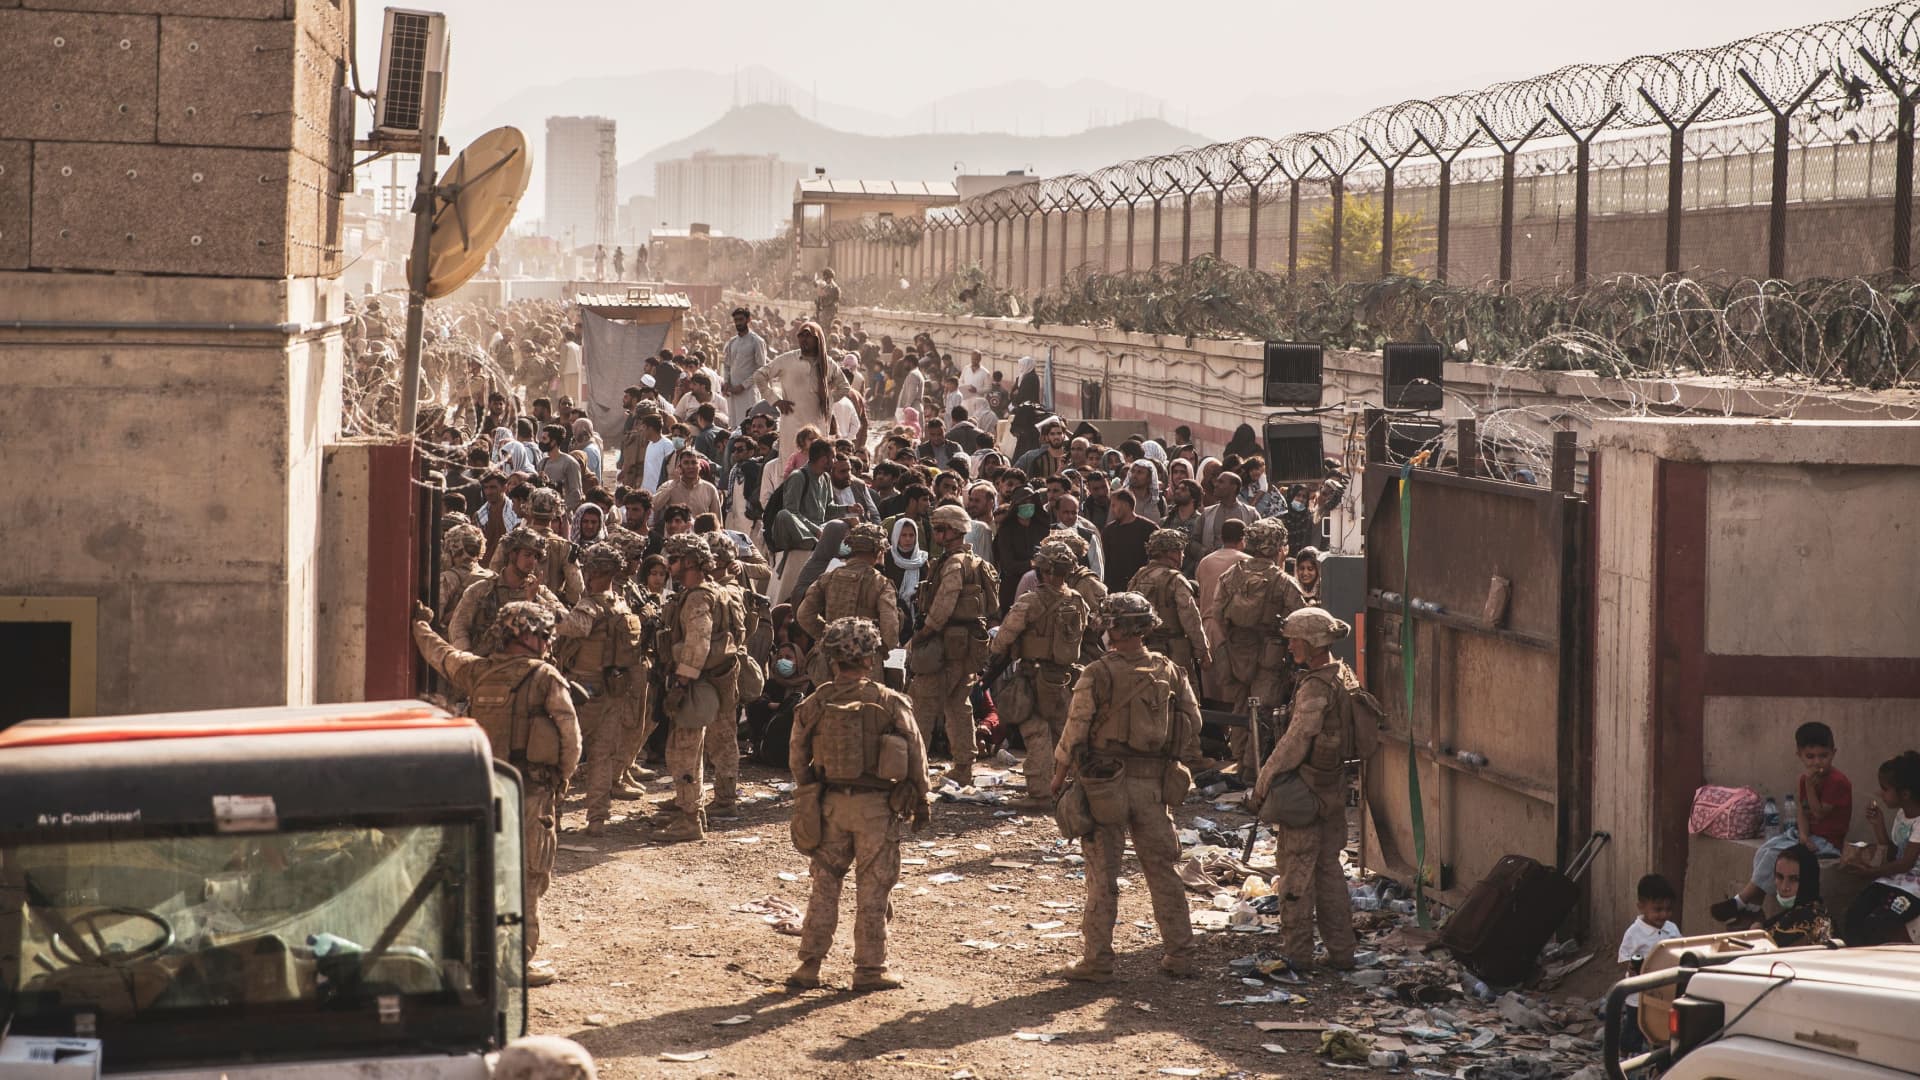 U.S. Marines provide assistance at an Evacuation Control Checkpoint (ECC) during an evacuation at Hamid Karzai International Airport, Afghanistan, August 22, 2021.